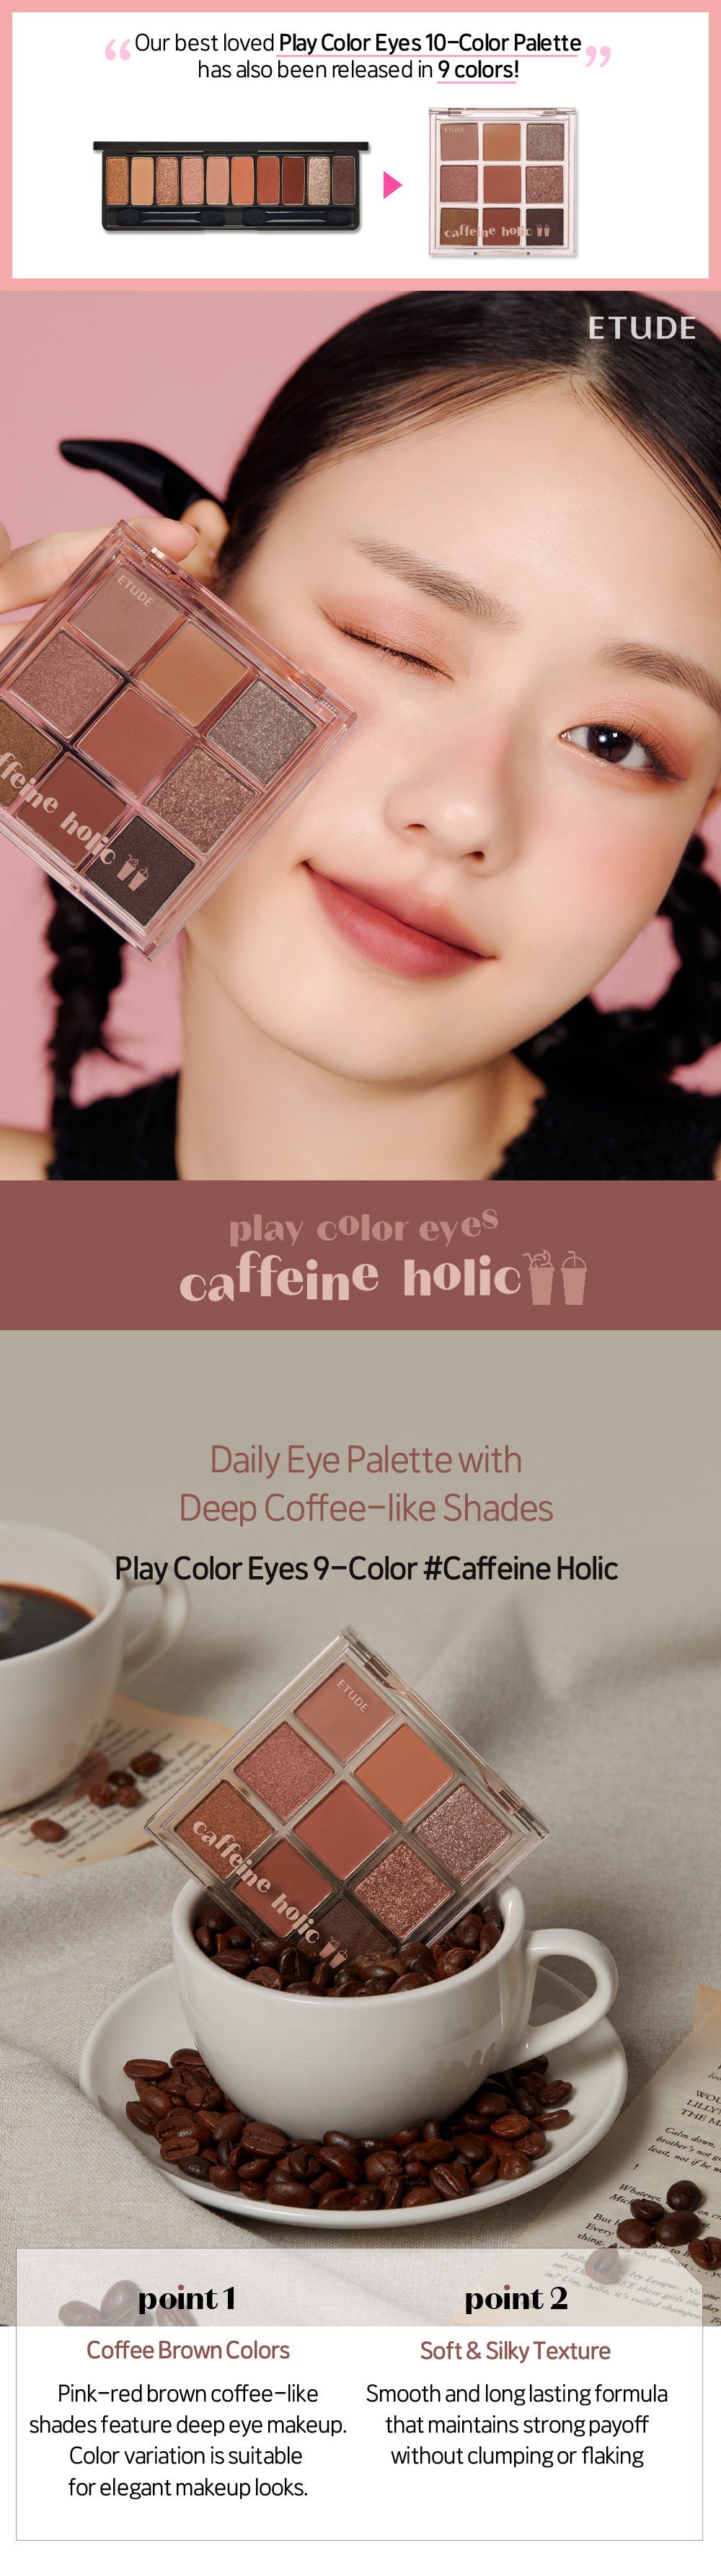 Play Color Eyes 9-Color #caffeineholic